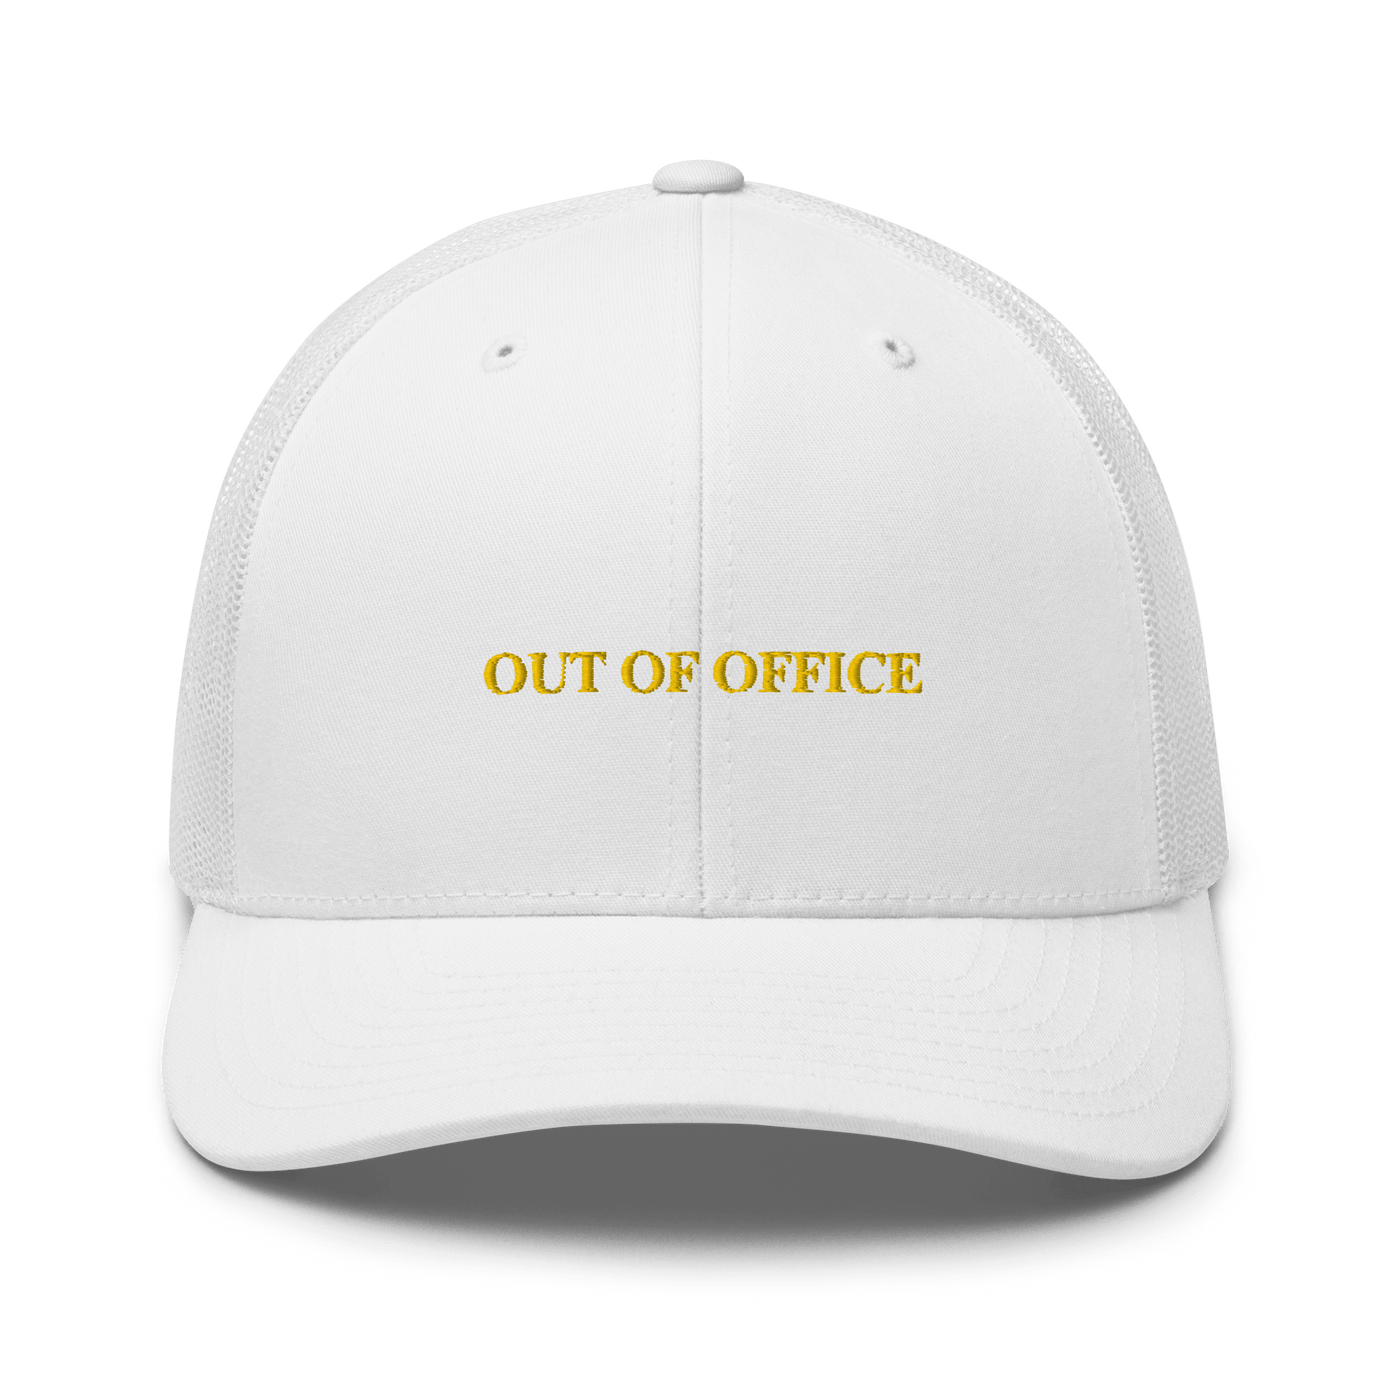 OUT OF OFFICE Trucker Cap - White - - Just Another Cap Store